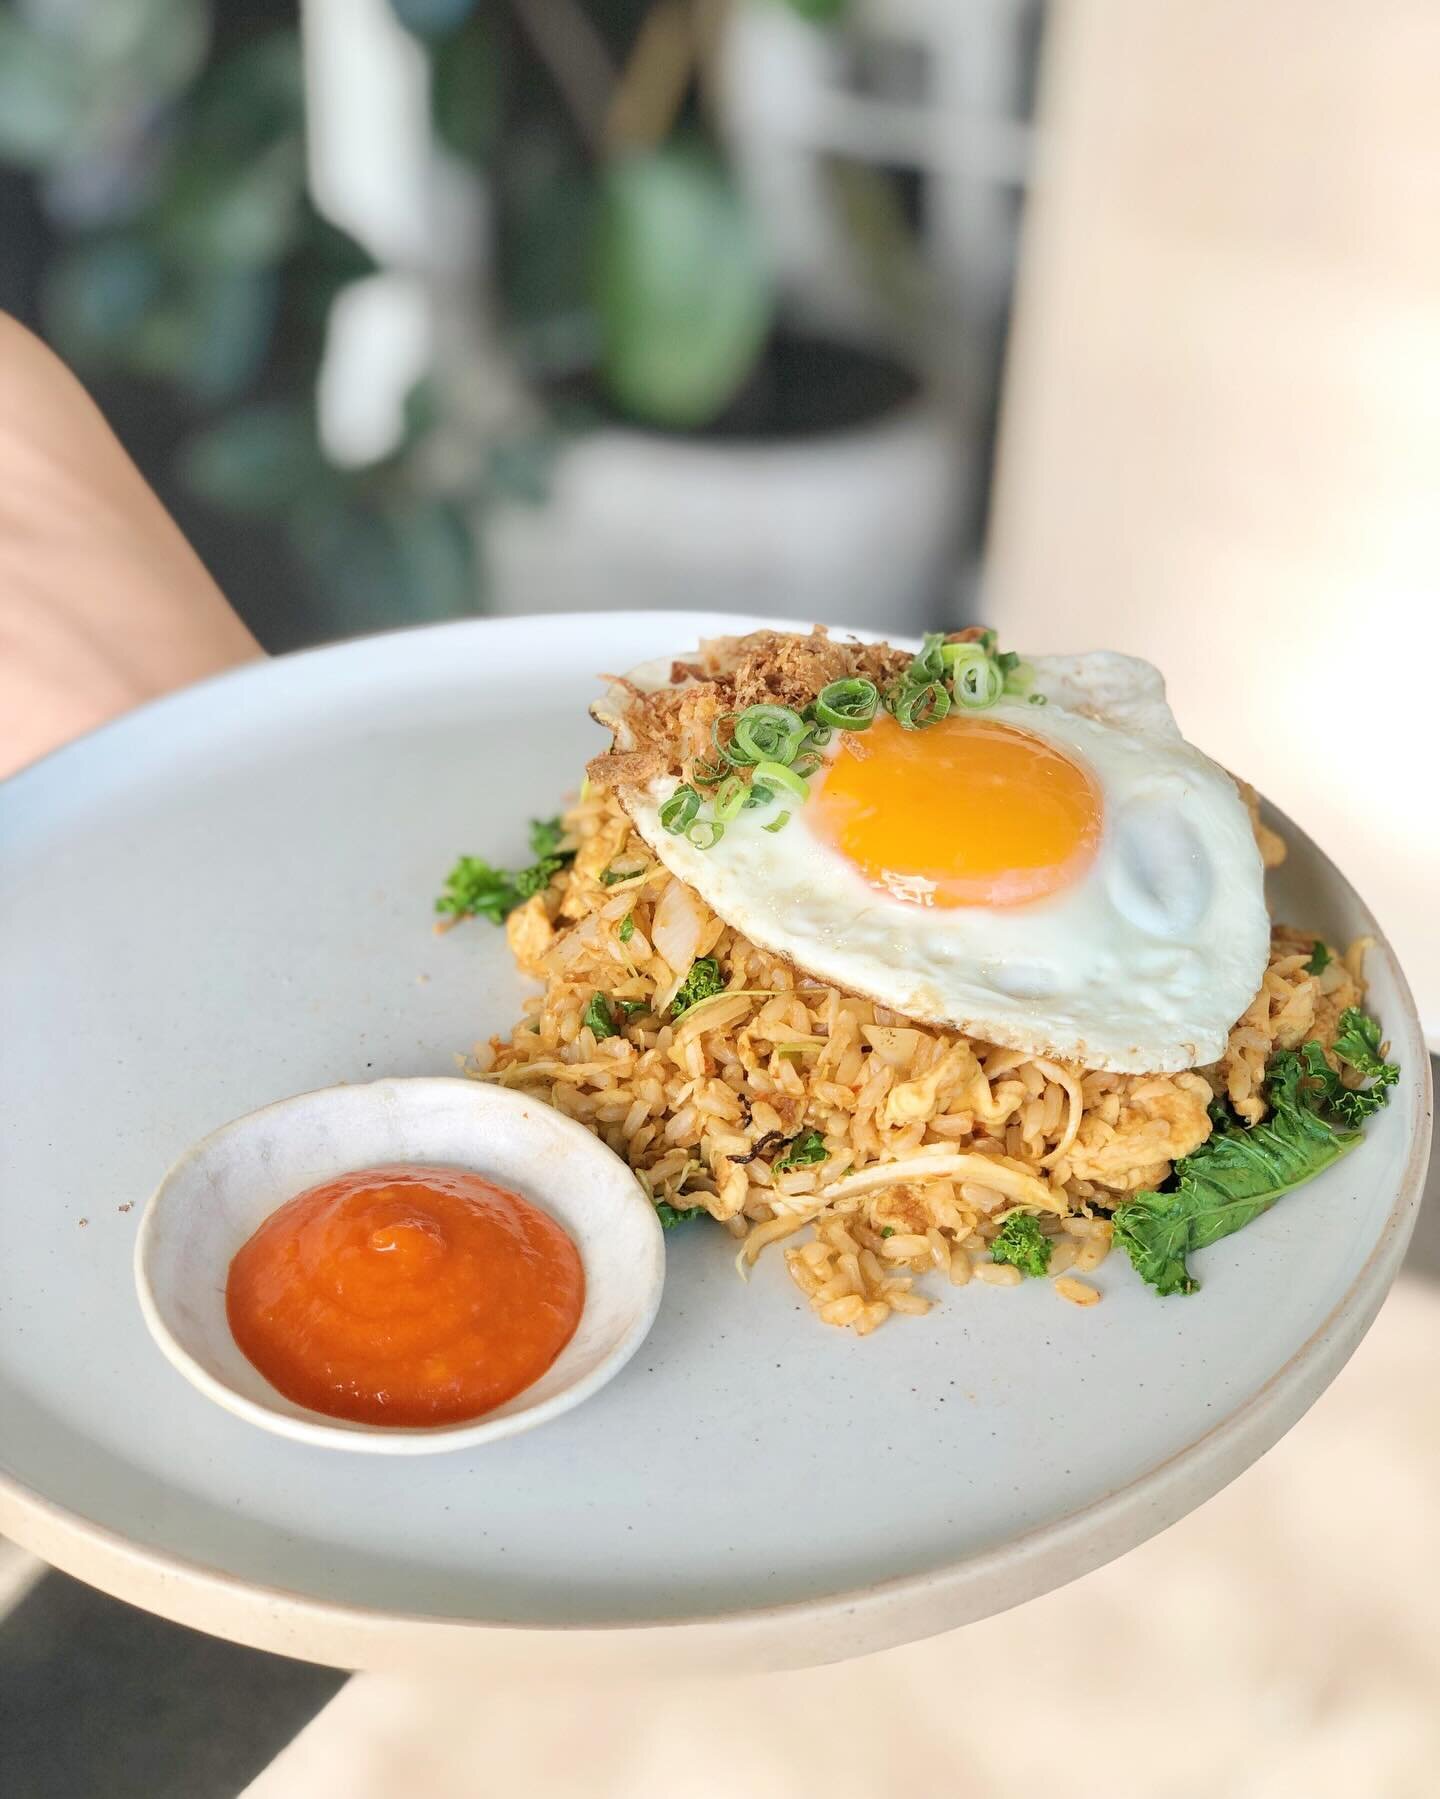 Nasi goreng weather all week 🌶️☔️ 

Weekdays from 6am-2pm
Weekends from 7am-2pm

📍37 Currumbin Creek Road, Currumbin Waters, QLD